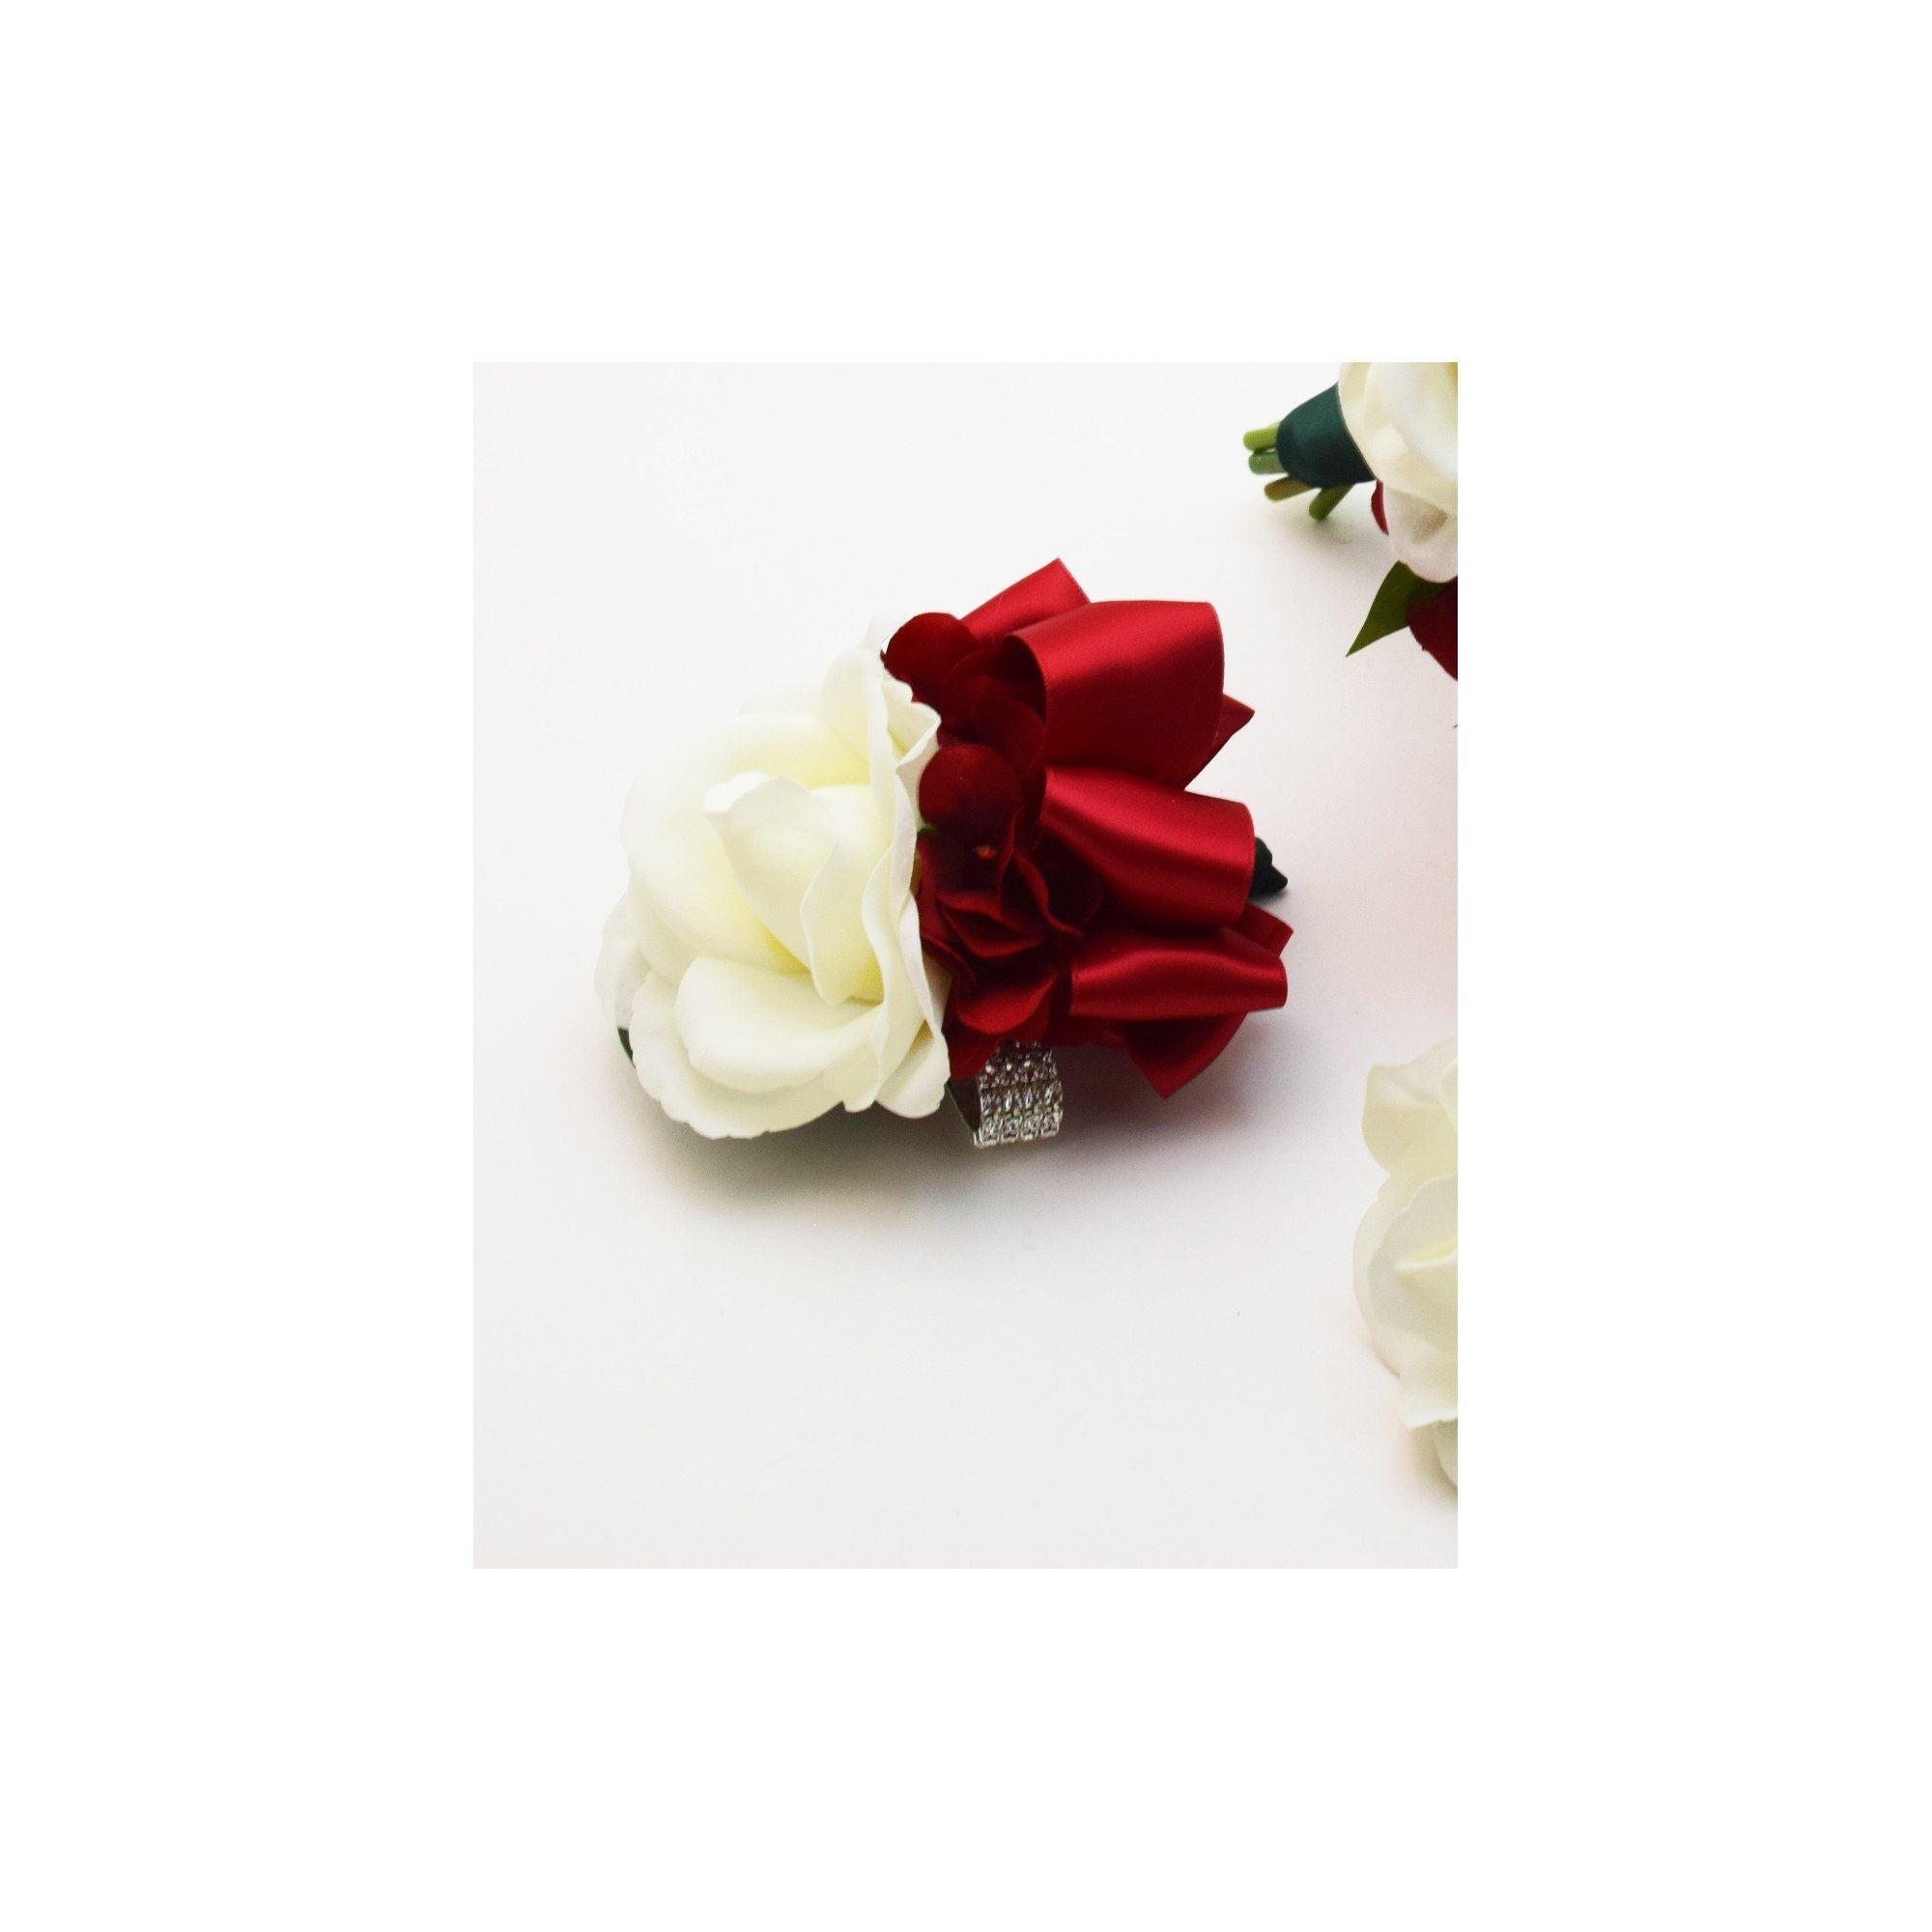 Cascade Bridal Bouquet Red White Gold - Real Touch Calla Lilies Roses Brooches - Add Groom Boutonniere Corsage Bridesmaid Bouquet & More!